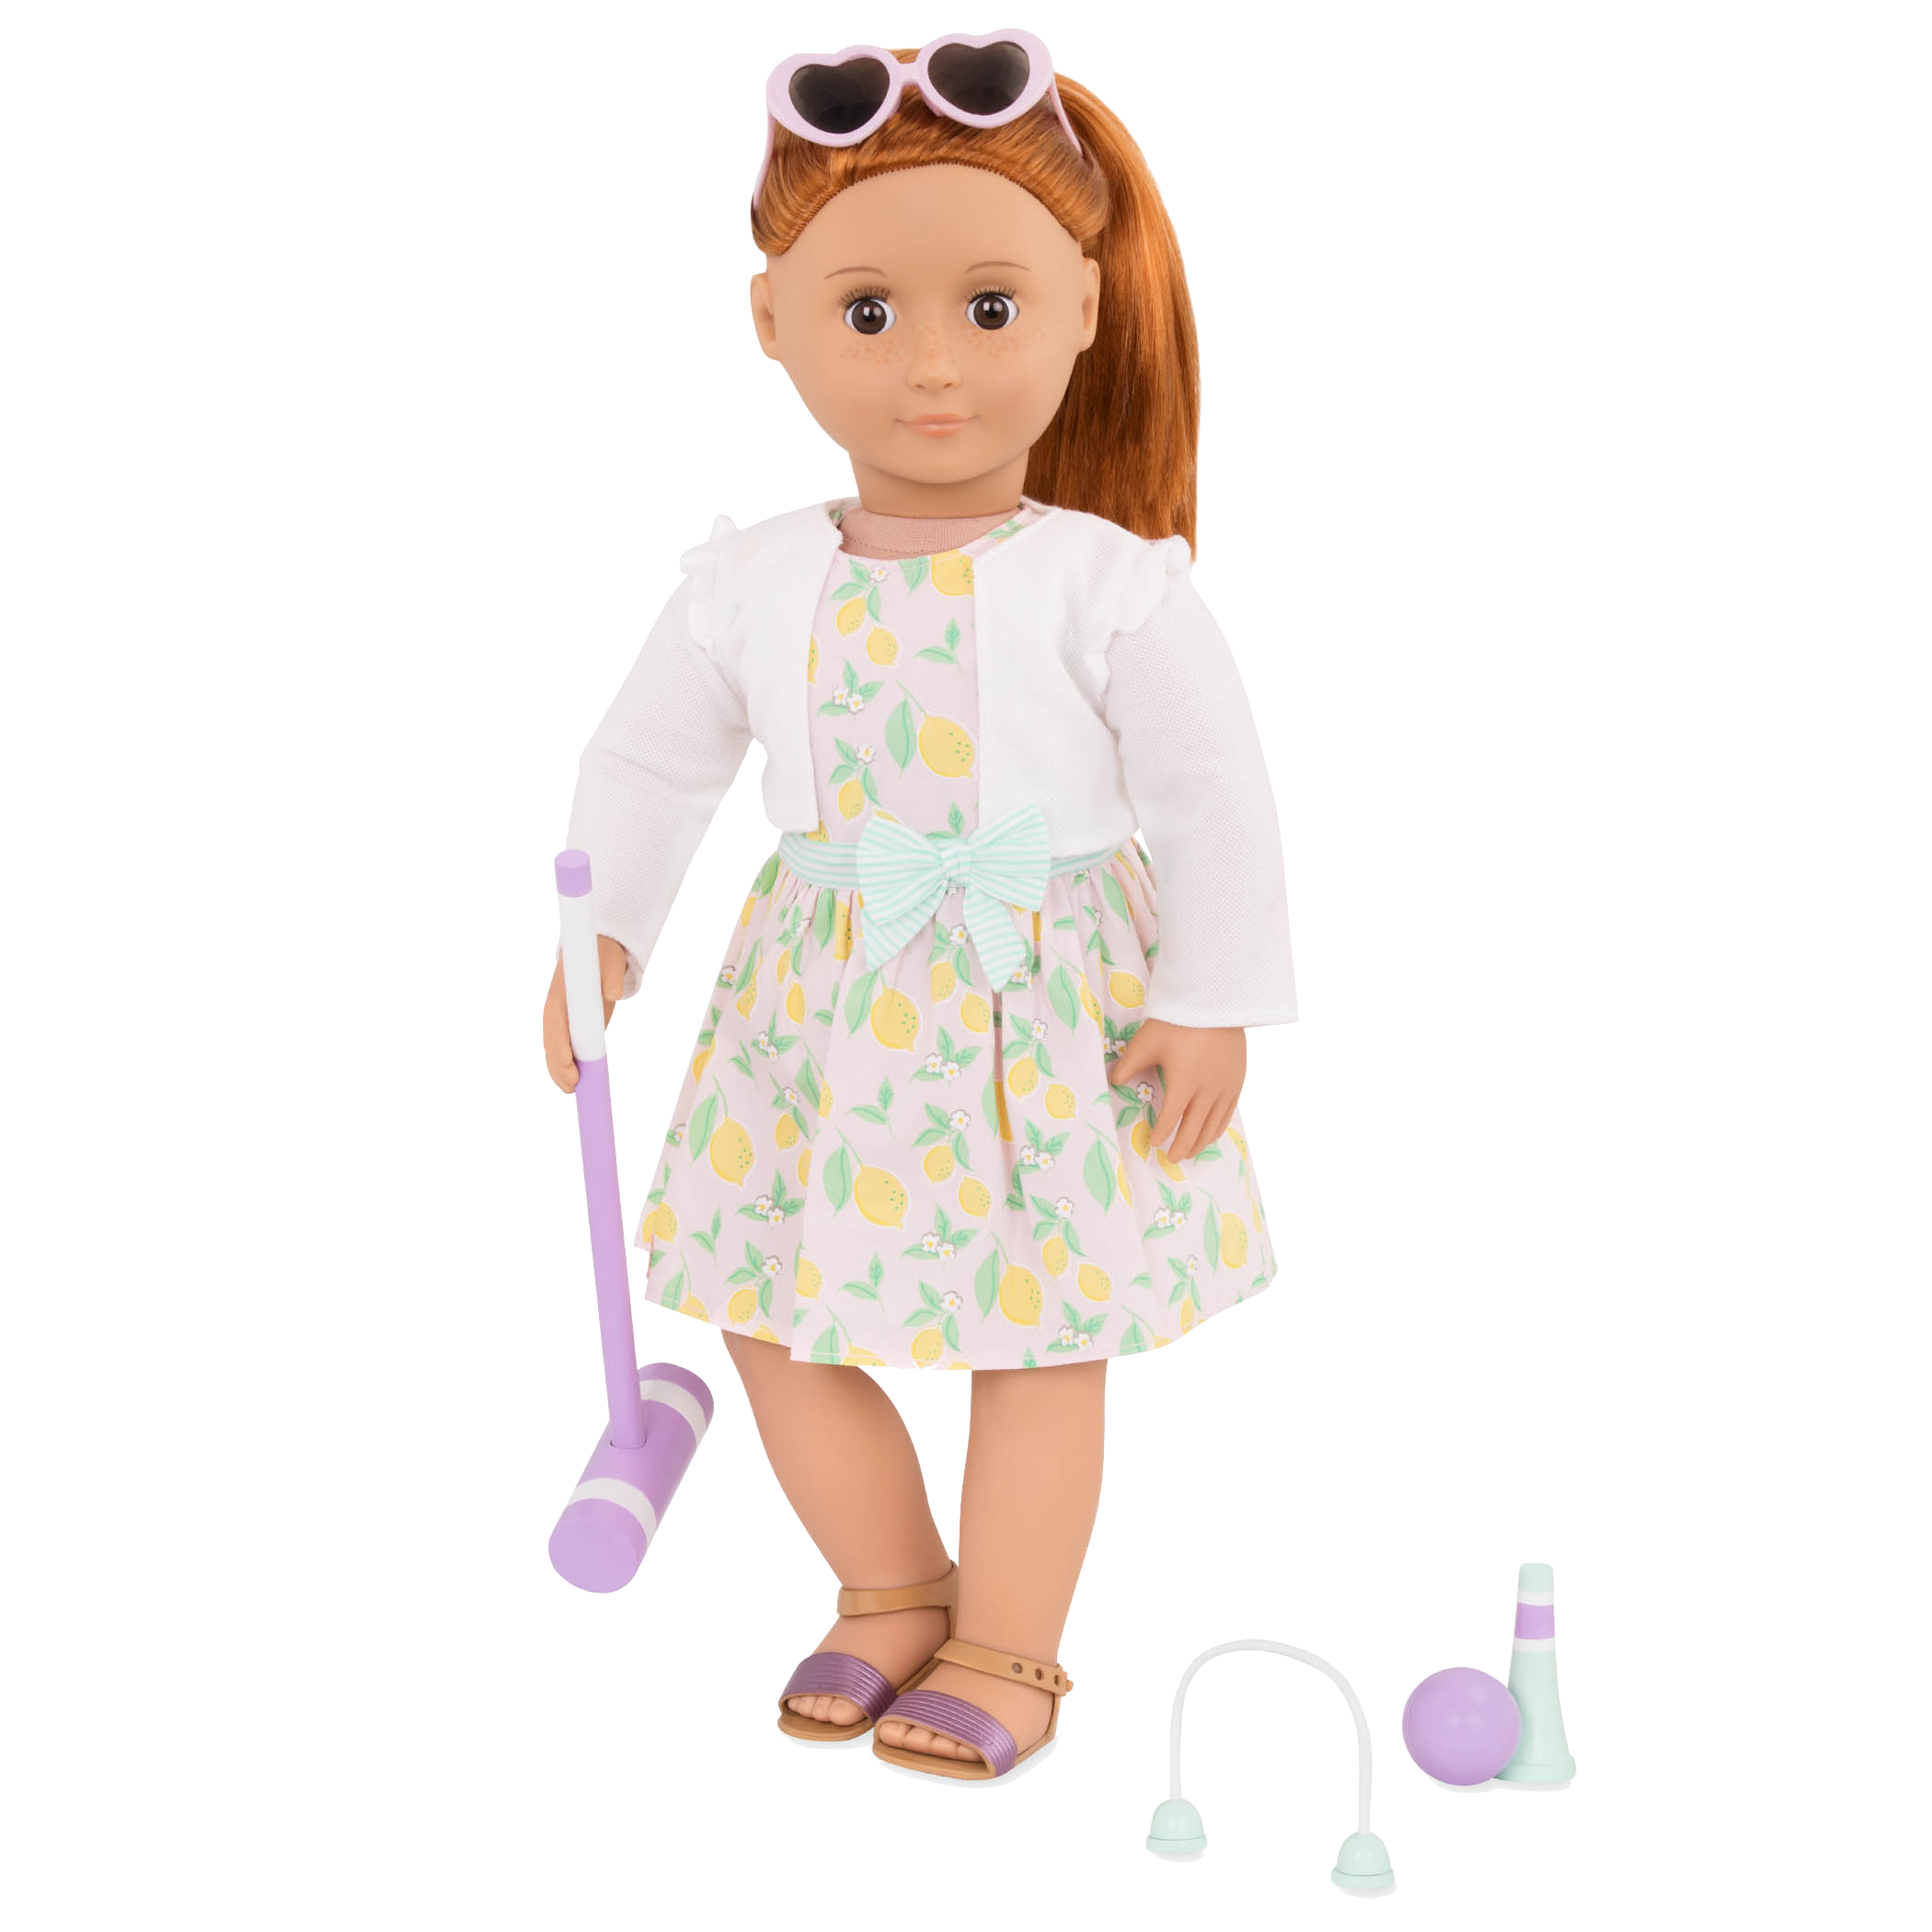 Croquet Play outfit Noa holding mallet